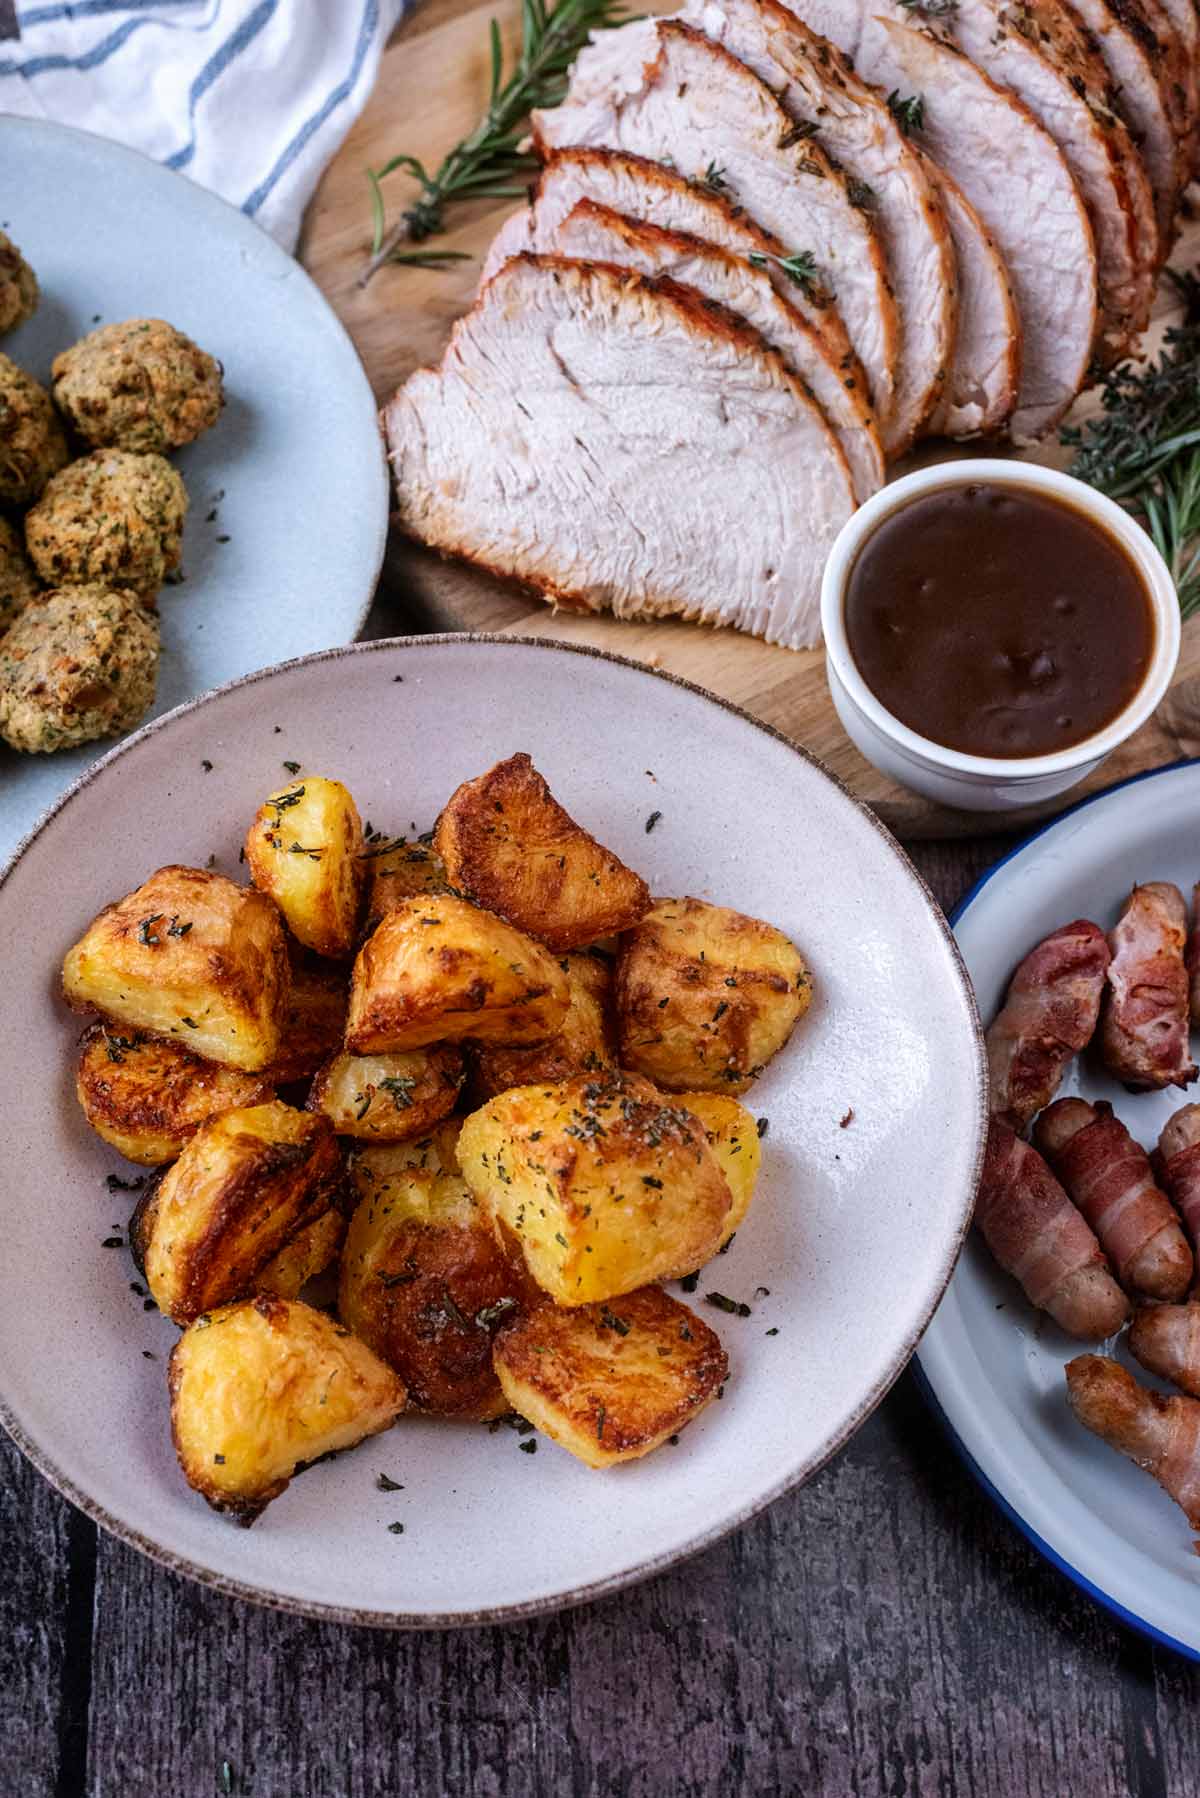 A bowl of roast potatoes in front of some sliced turkey and a small pot of gravy.